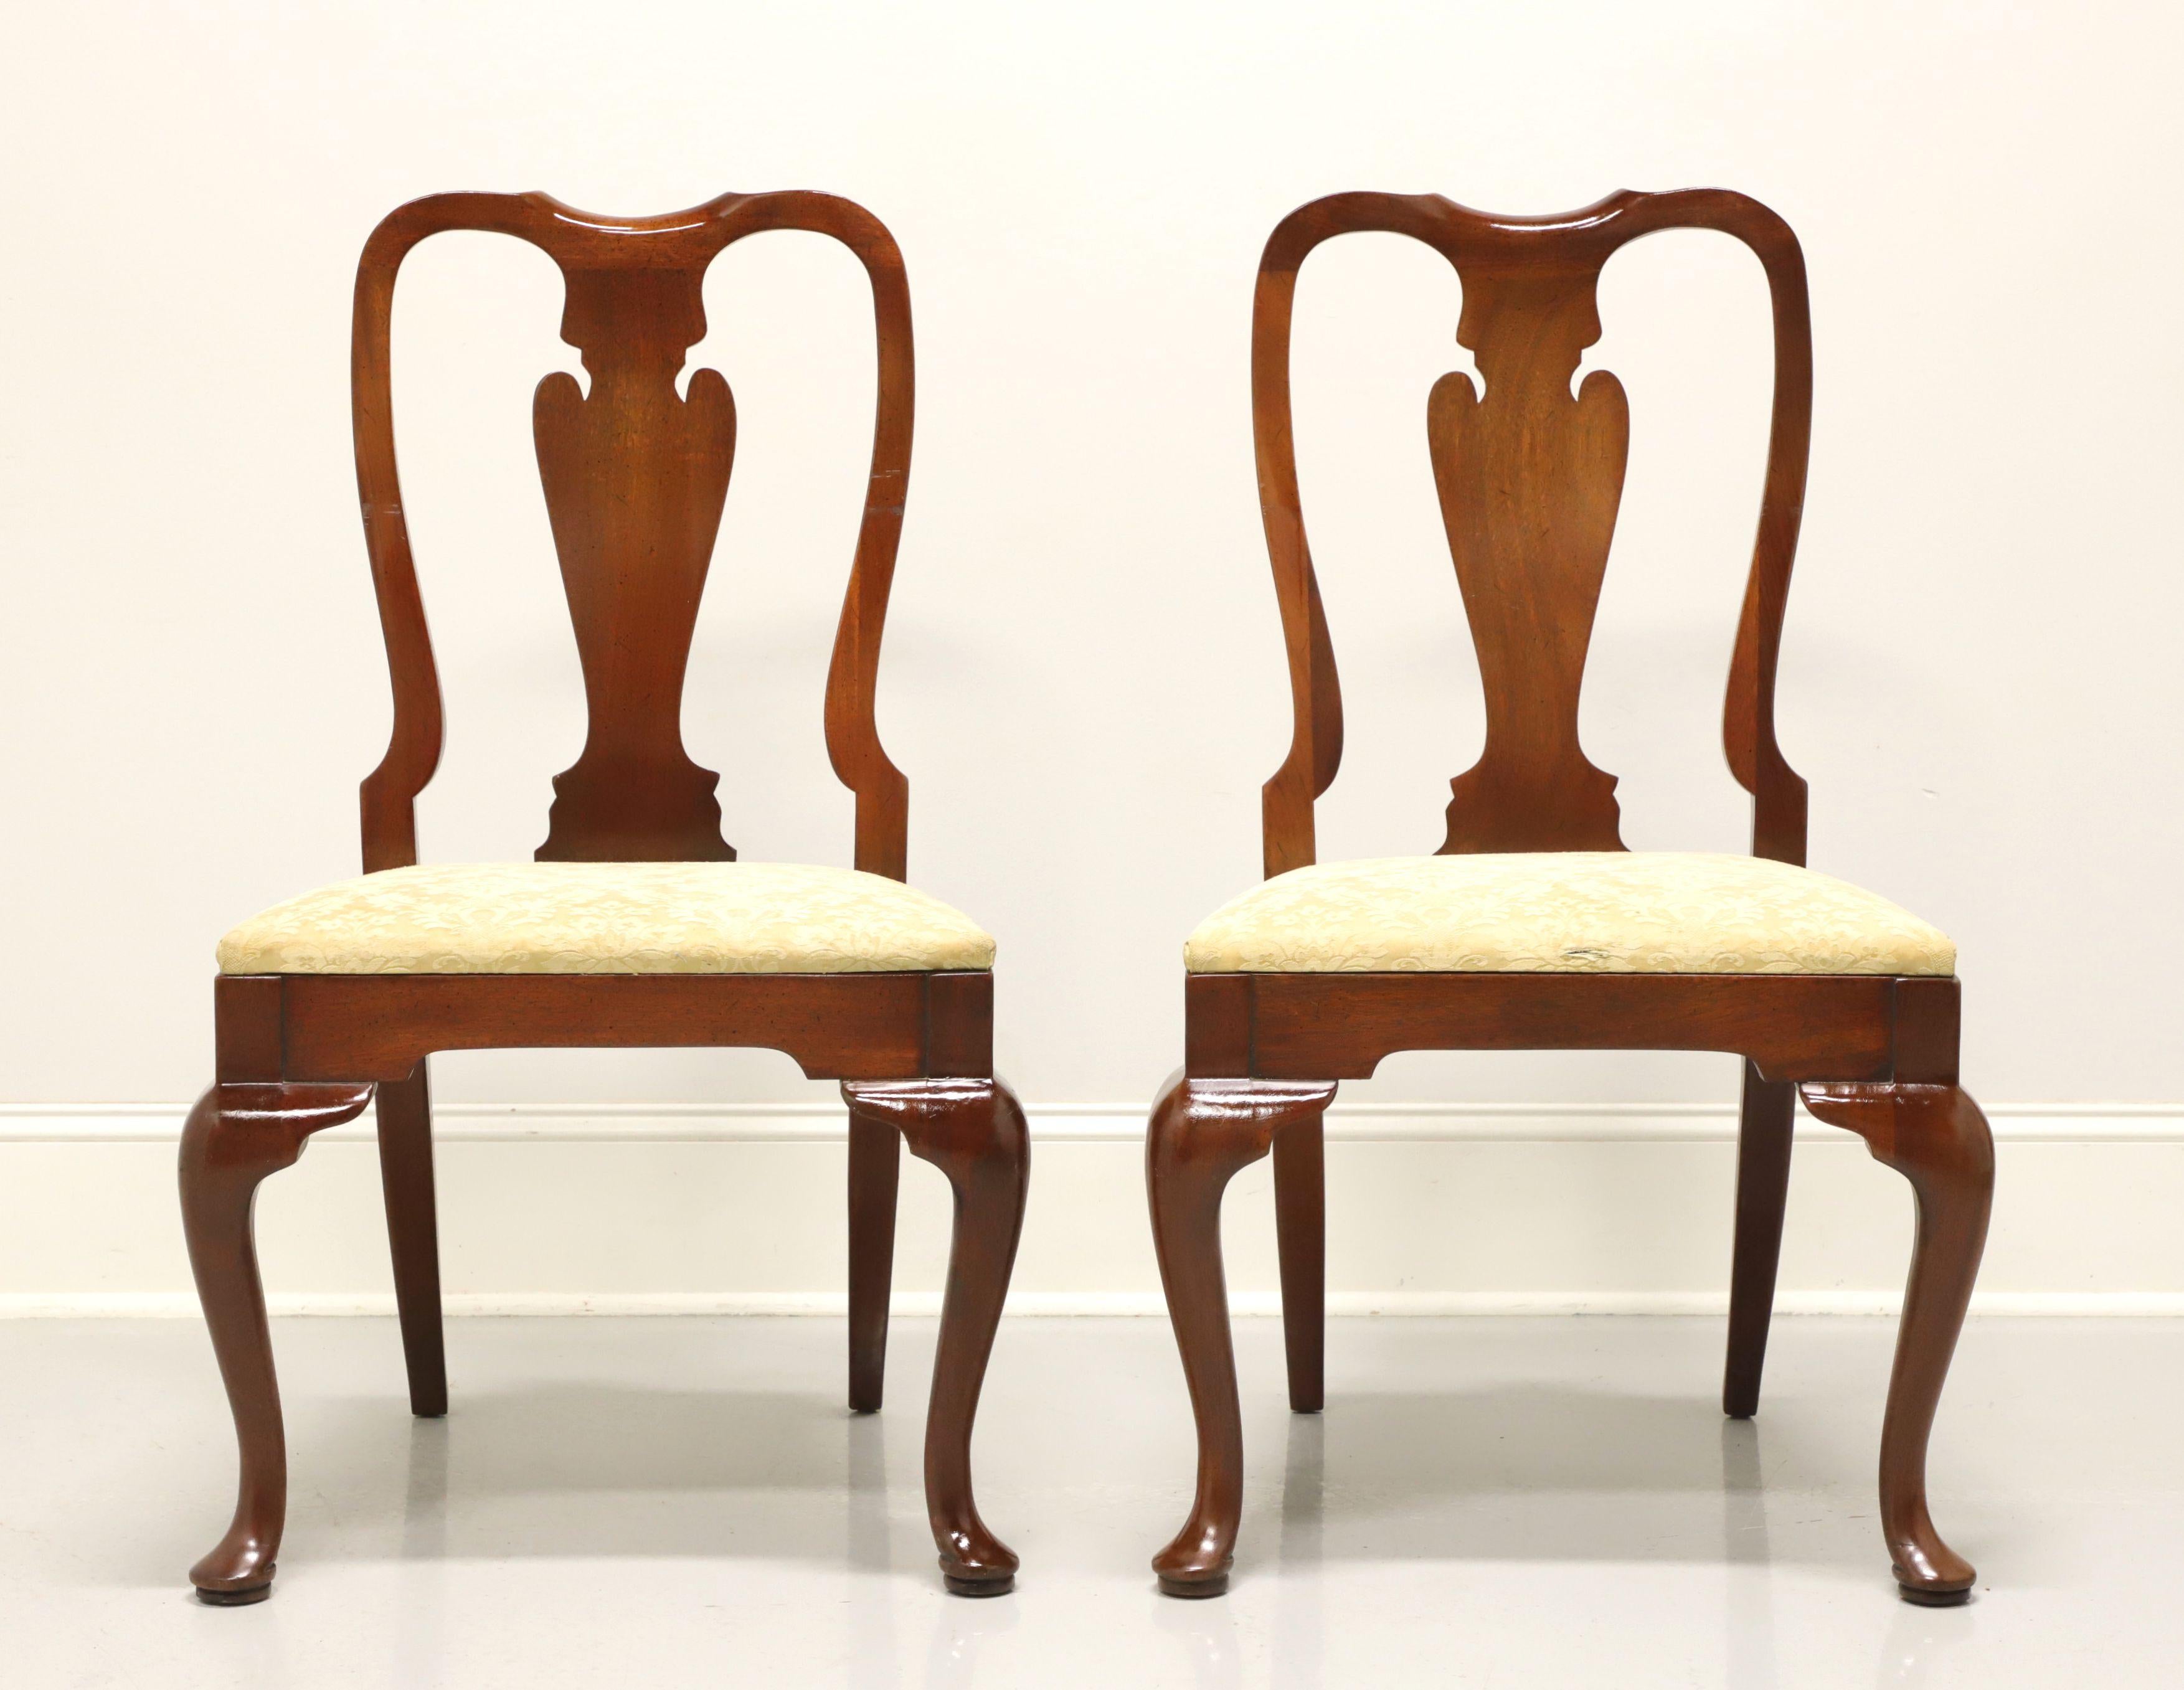 American HICKORY CHAIR Amber Mahogany Queen Anne Dining Side Chairs - Pair C